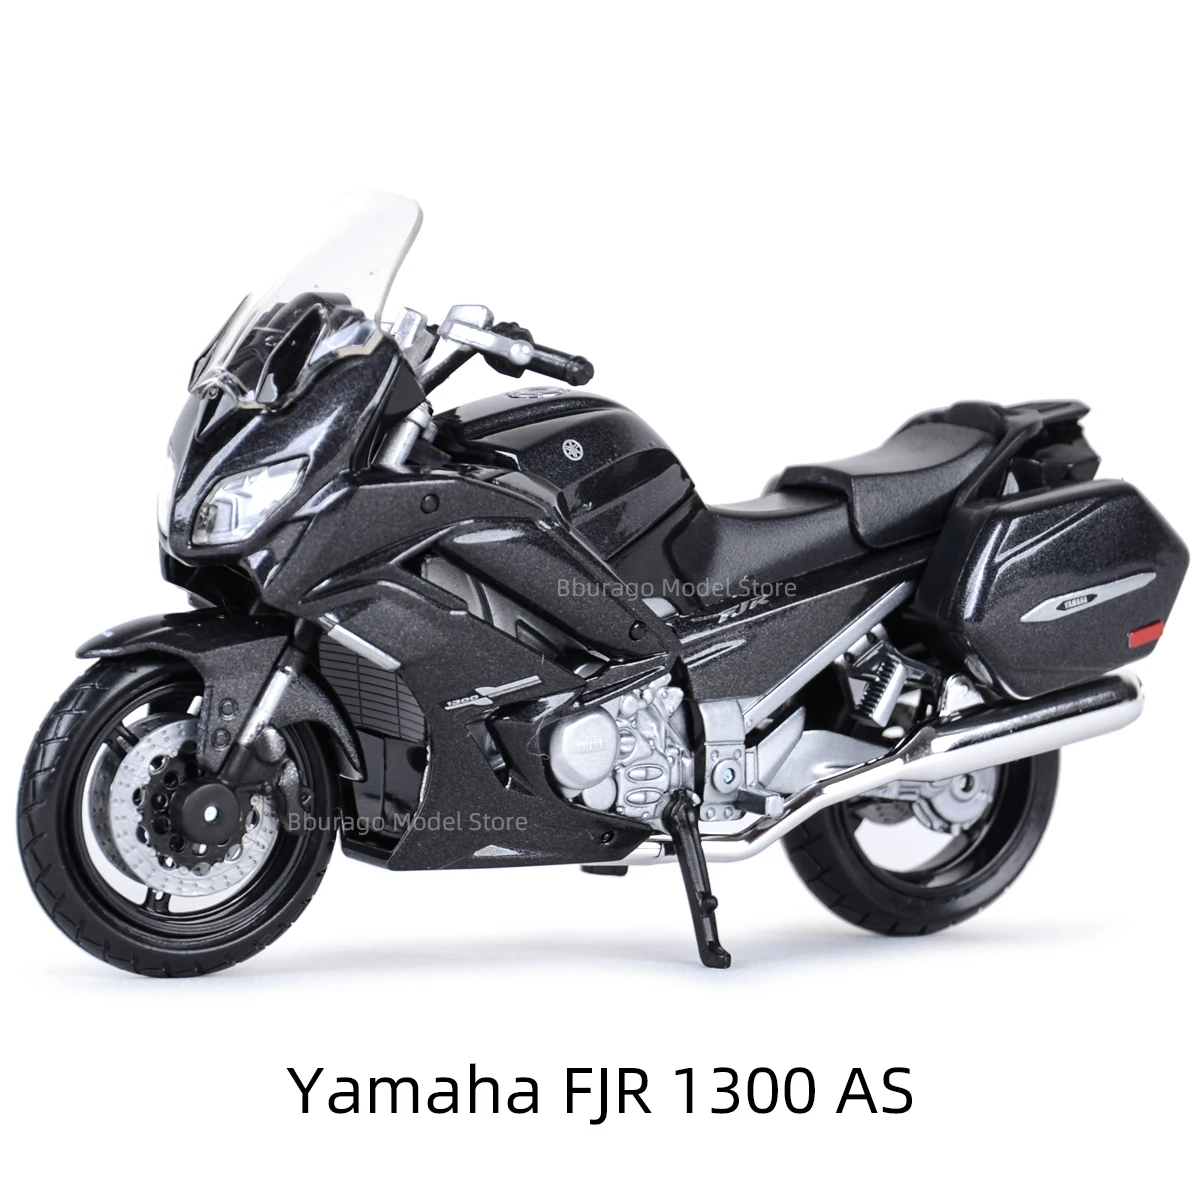 Bburago 1:18 Yamaha FJR 1300 AS Static Die Cast Vehicles Collectible Motorcycle Model Toys